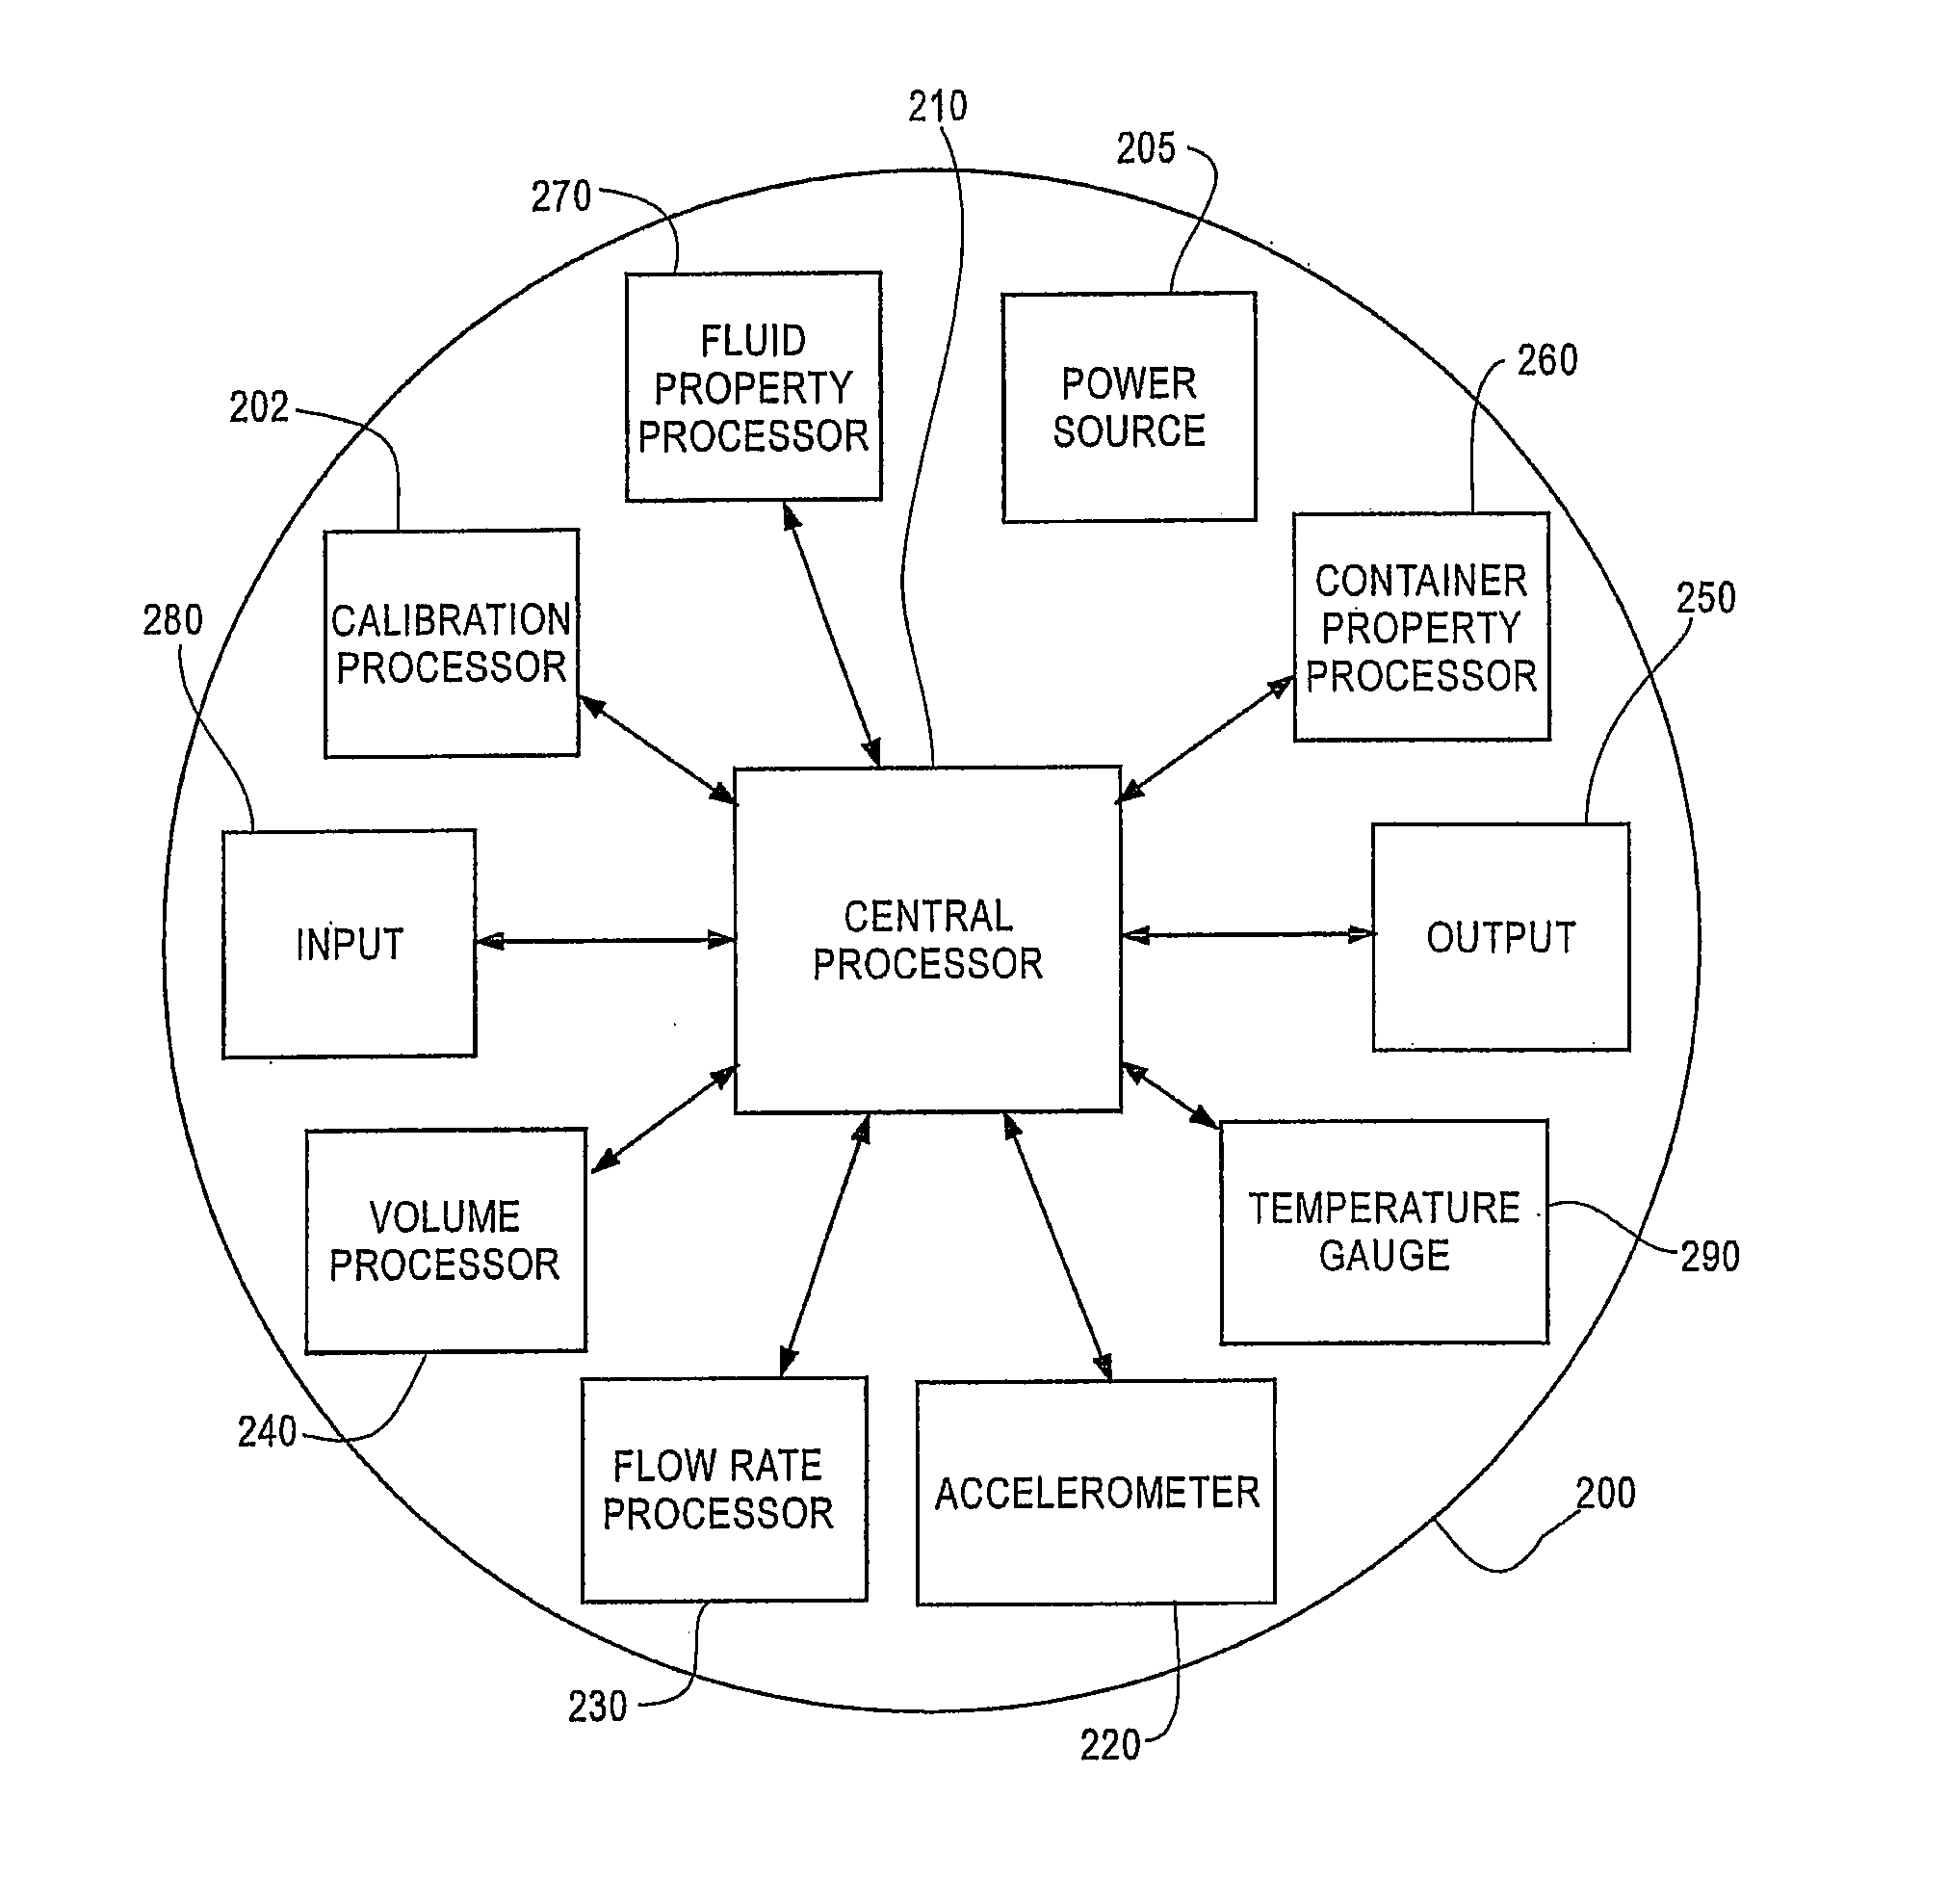 Apparatus and methods for monitoring quantities of fluid in a container